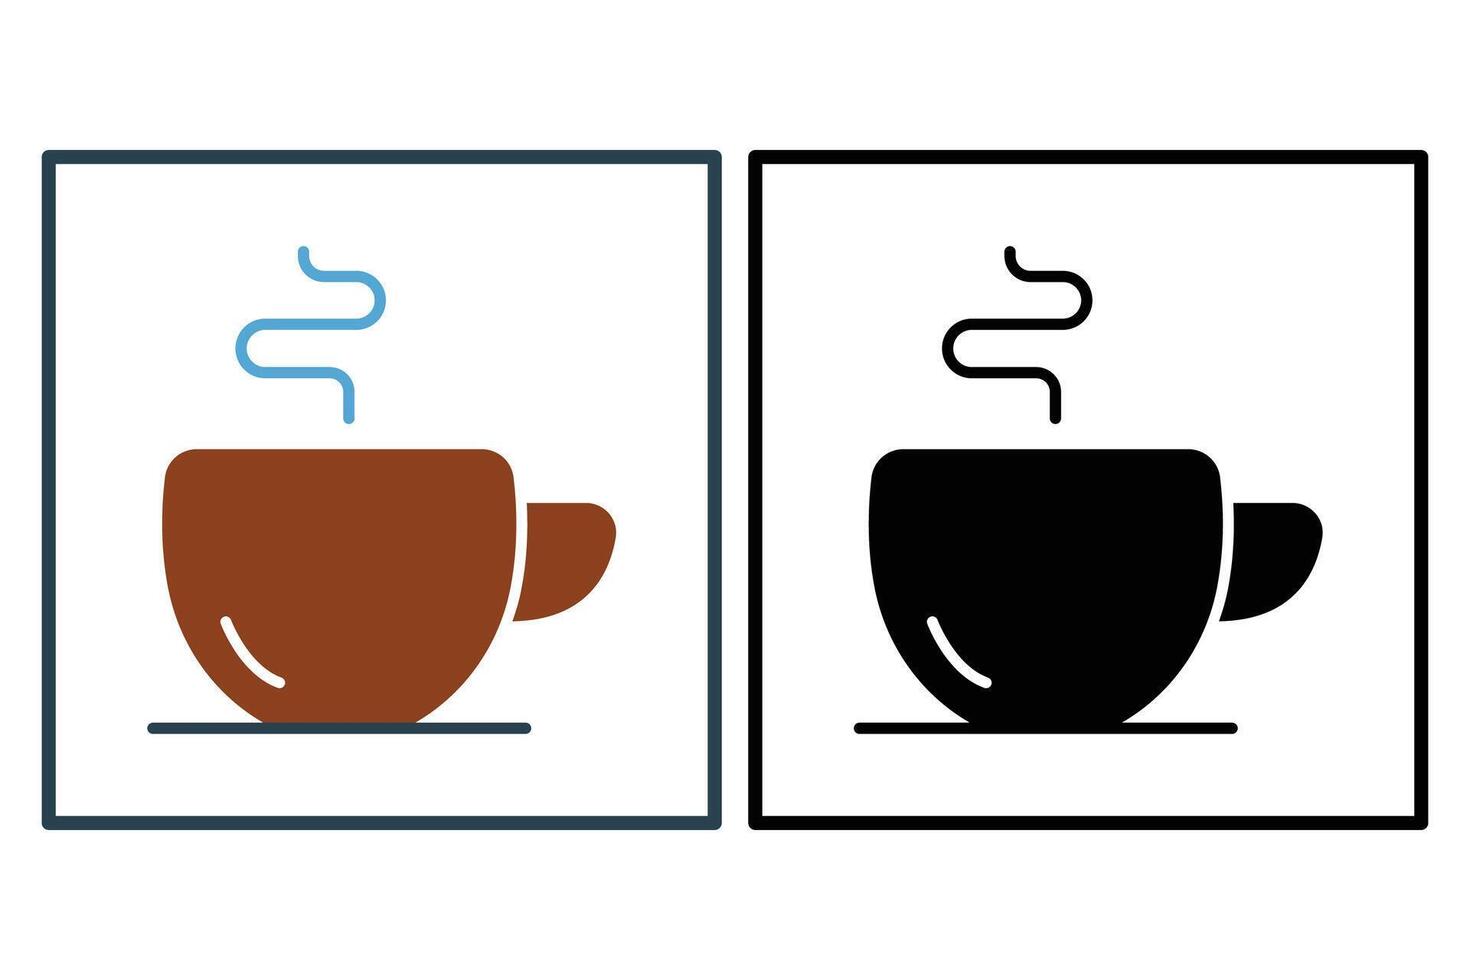 Coffee cup icon. icon related to coffee shops and cafes. solid icon style. element illustration vector